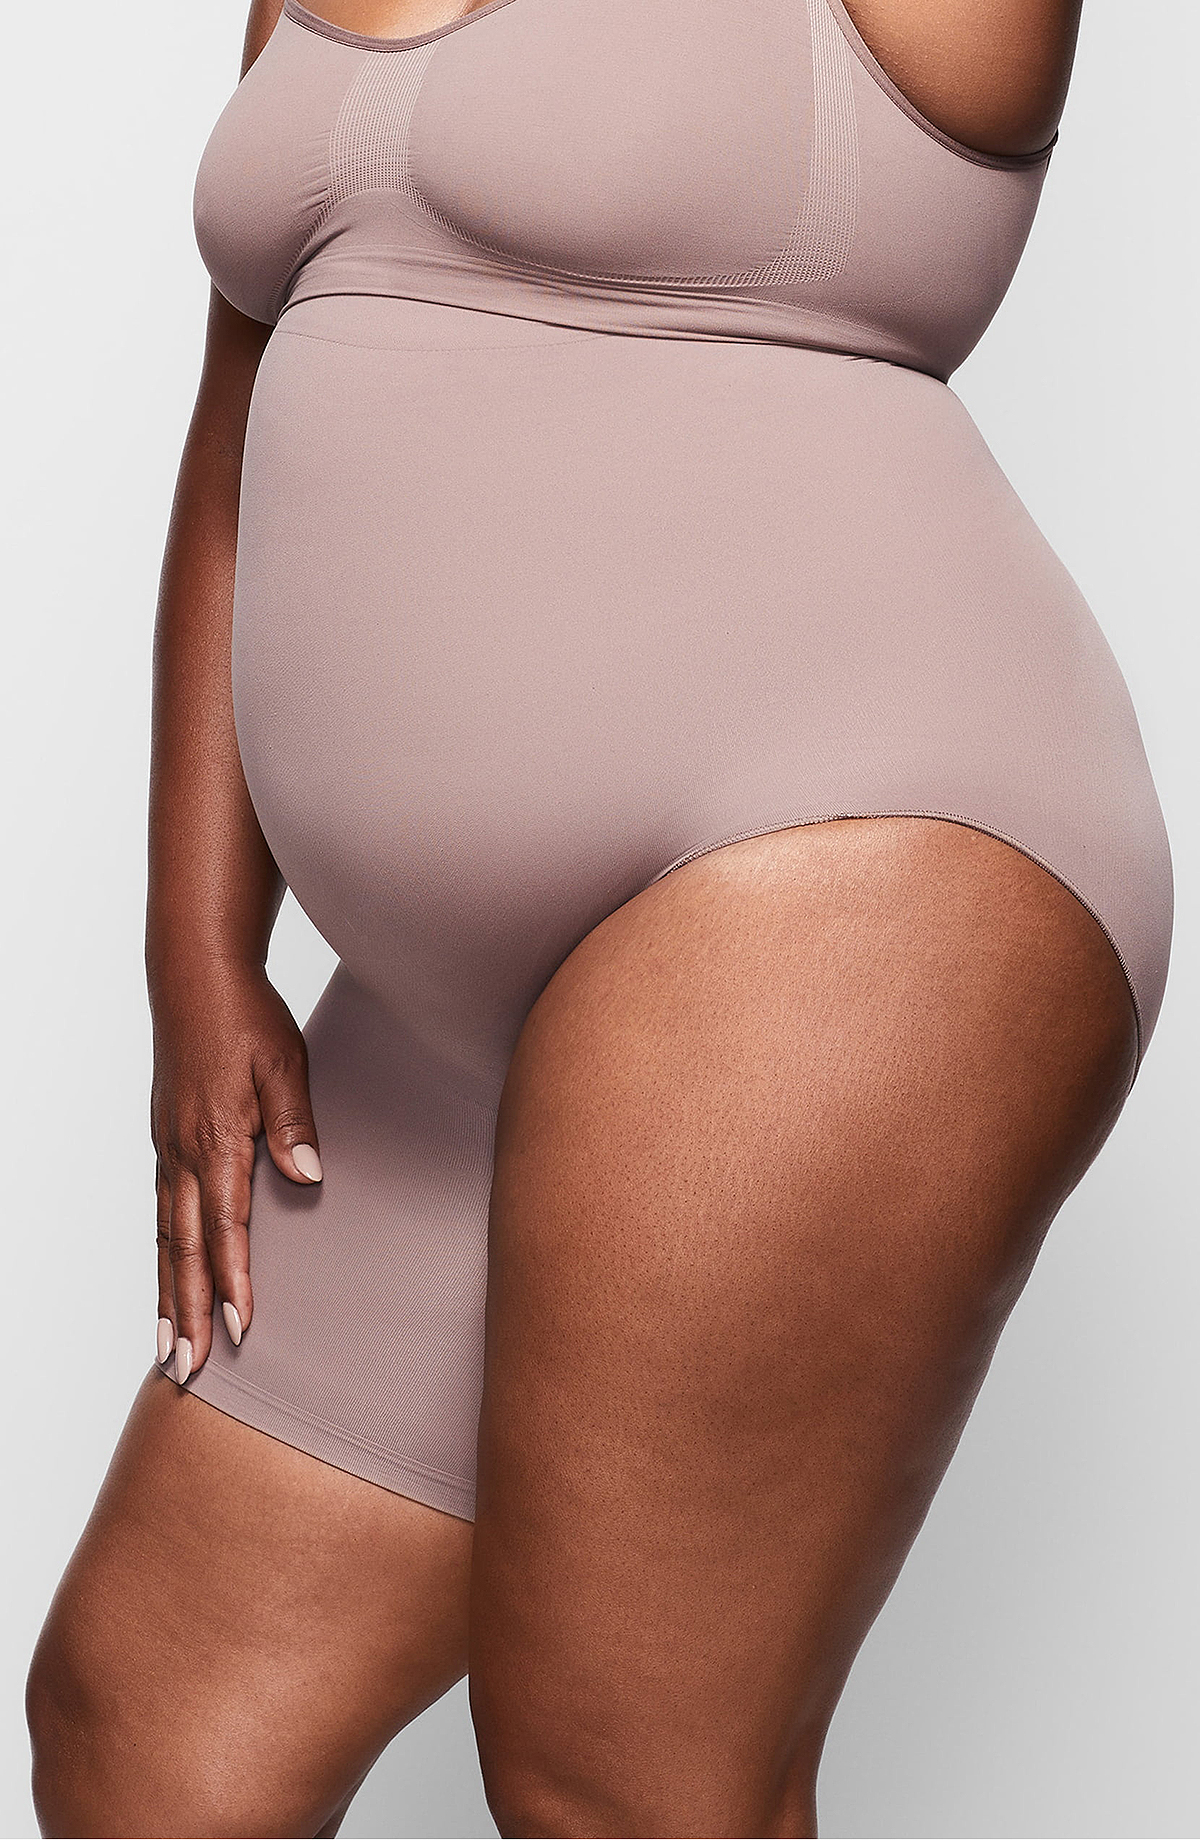 Kim Kardashian's Shapewear Line, SKIMS, Is Here! What to Know About Her  Solution-Focused Designs